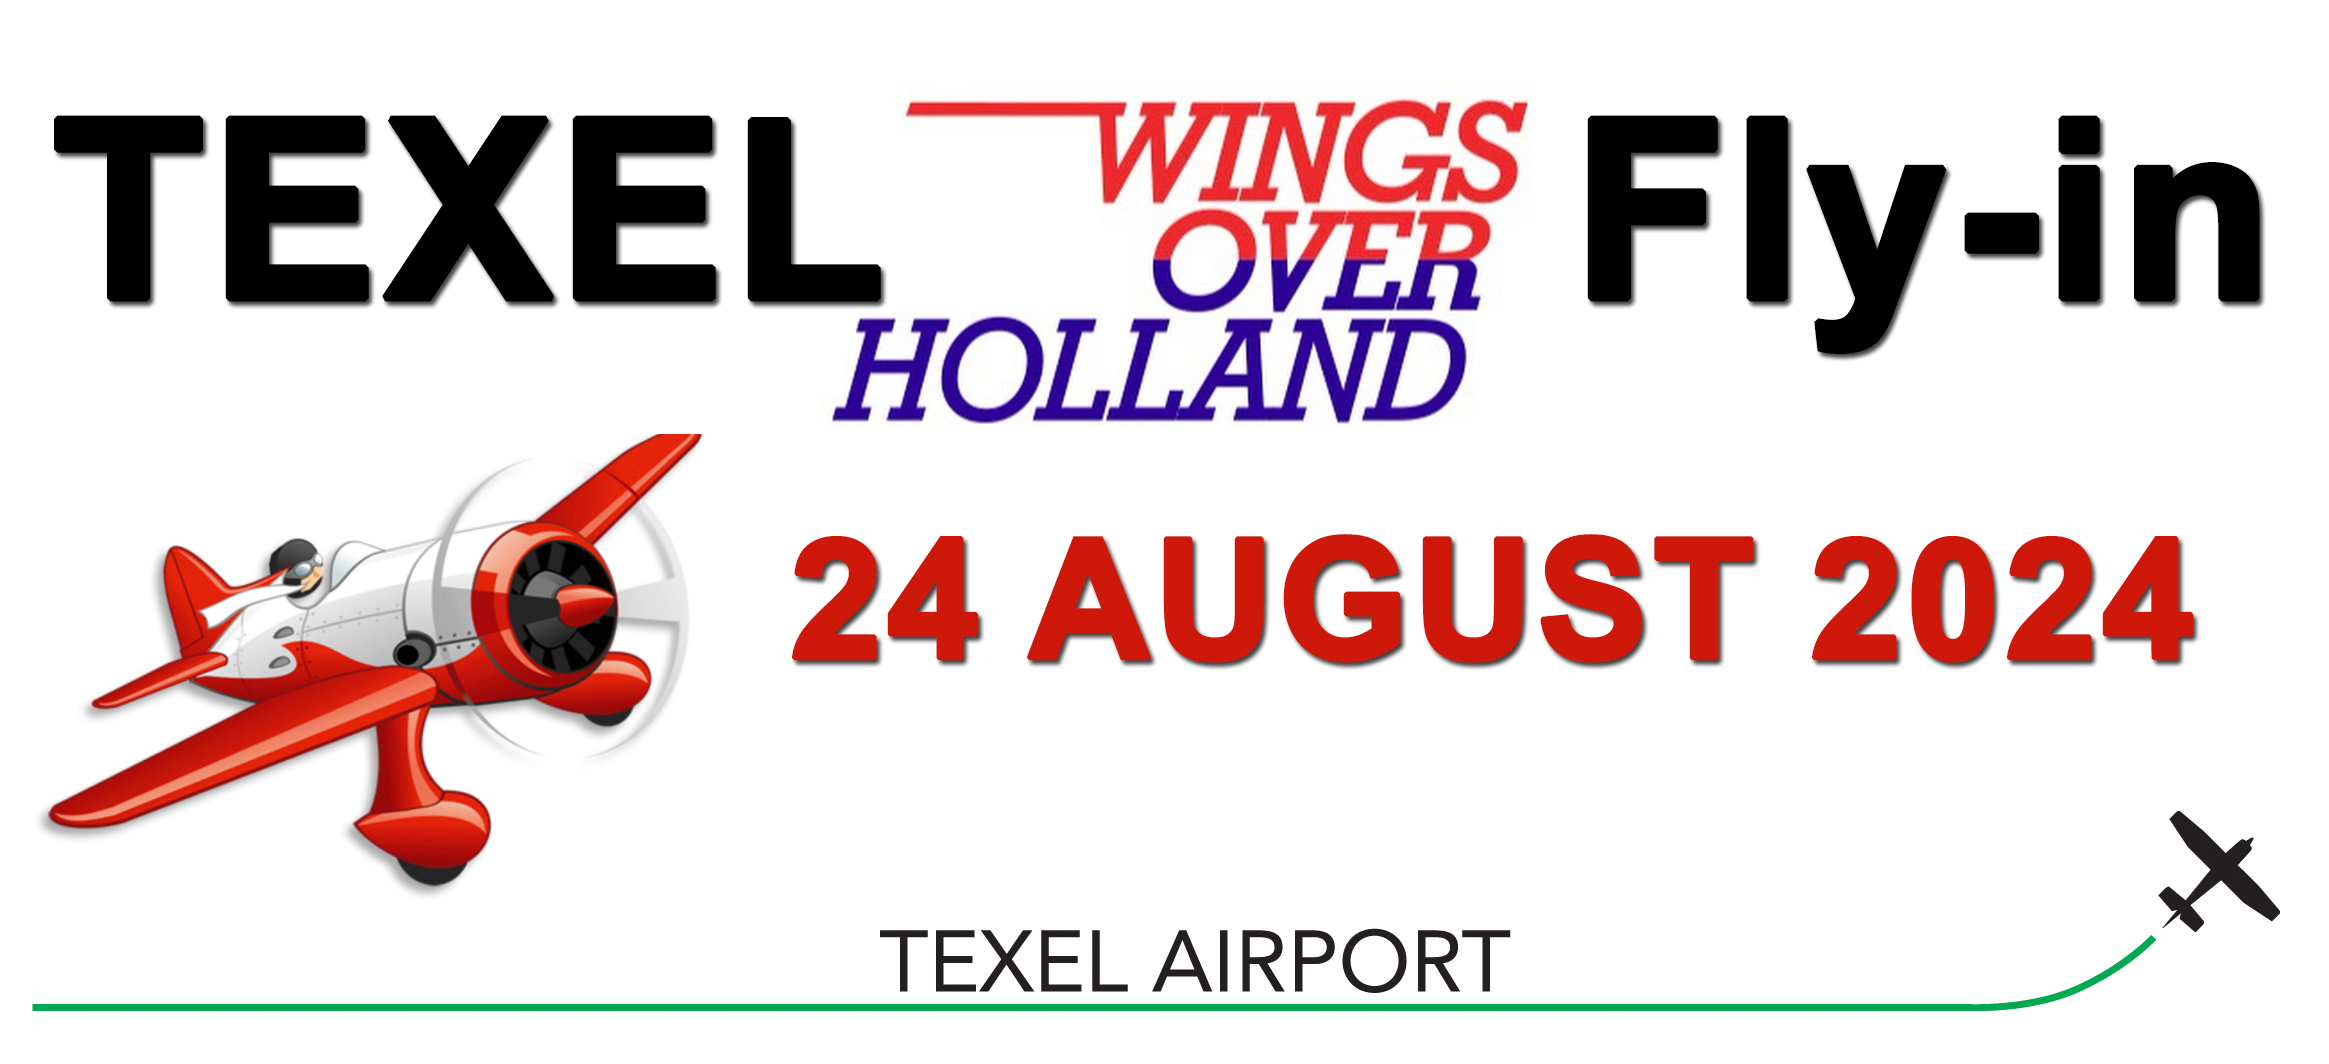 Texel "Wings over Holland" Fly-in 2023 Logo